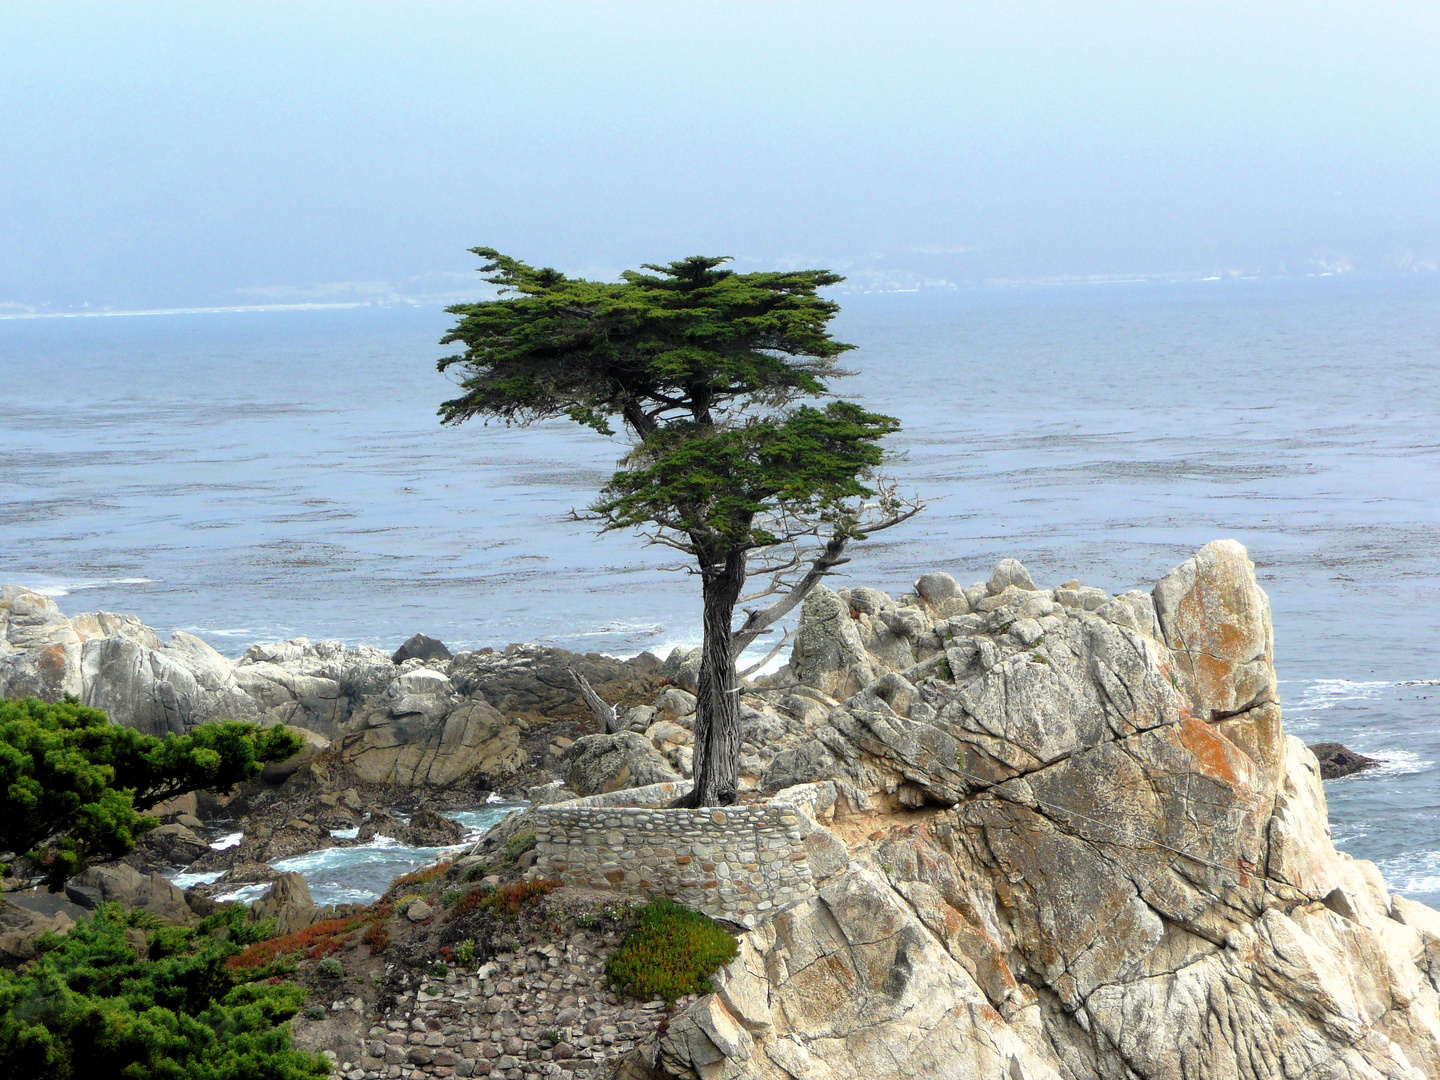 The lonely Cypress am 17-Mile Drive